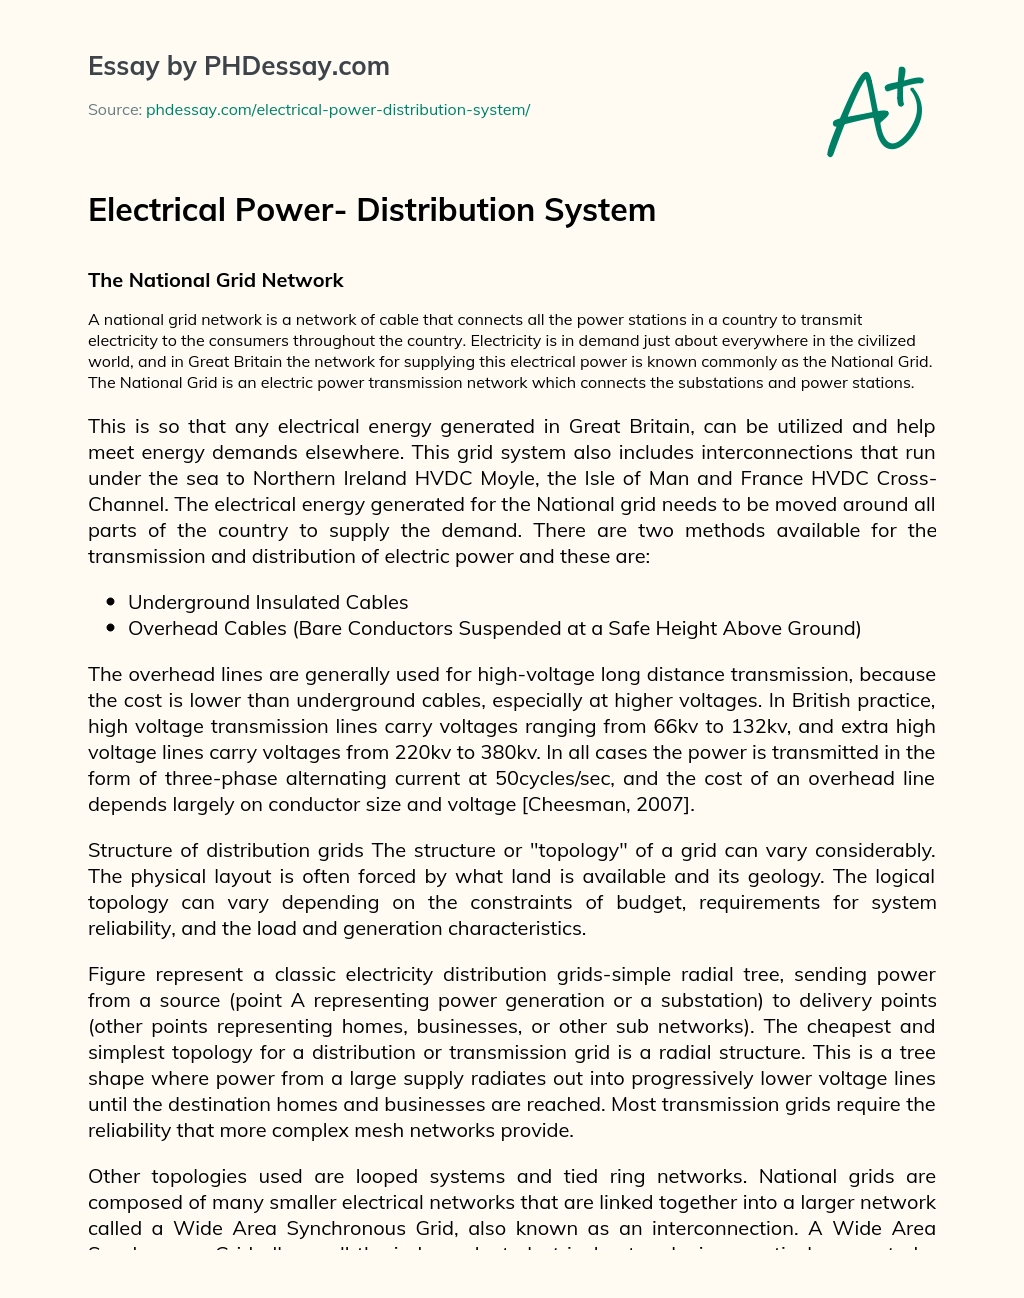 Electrical Power- Distribution System essay